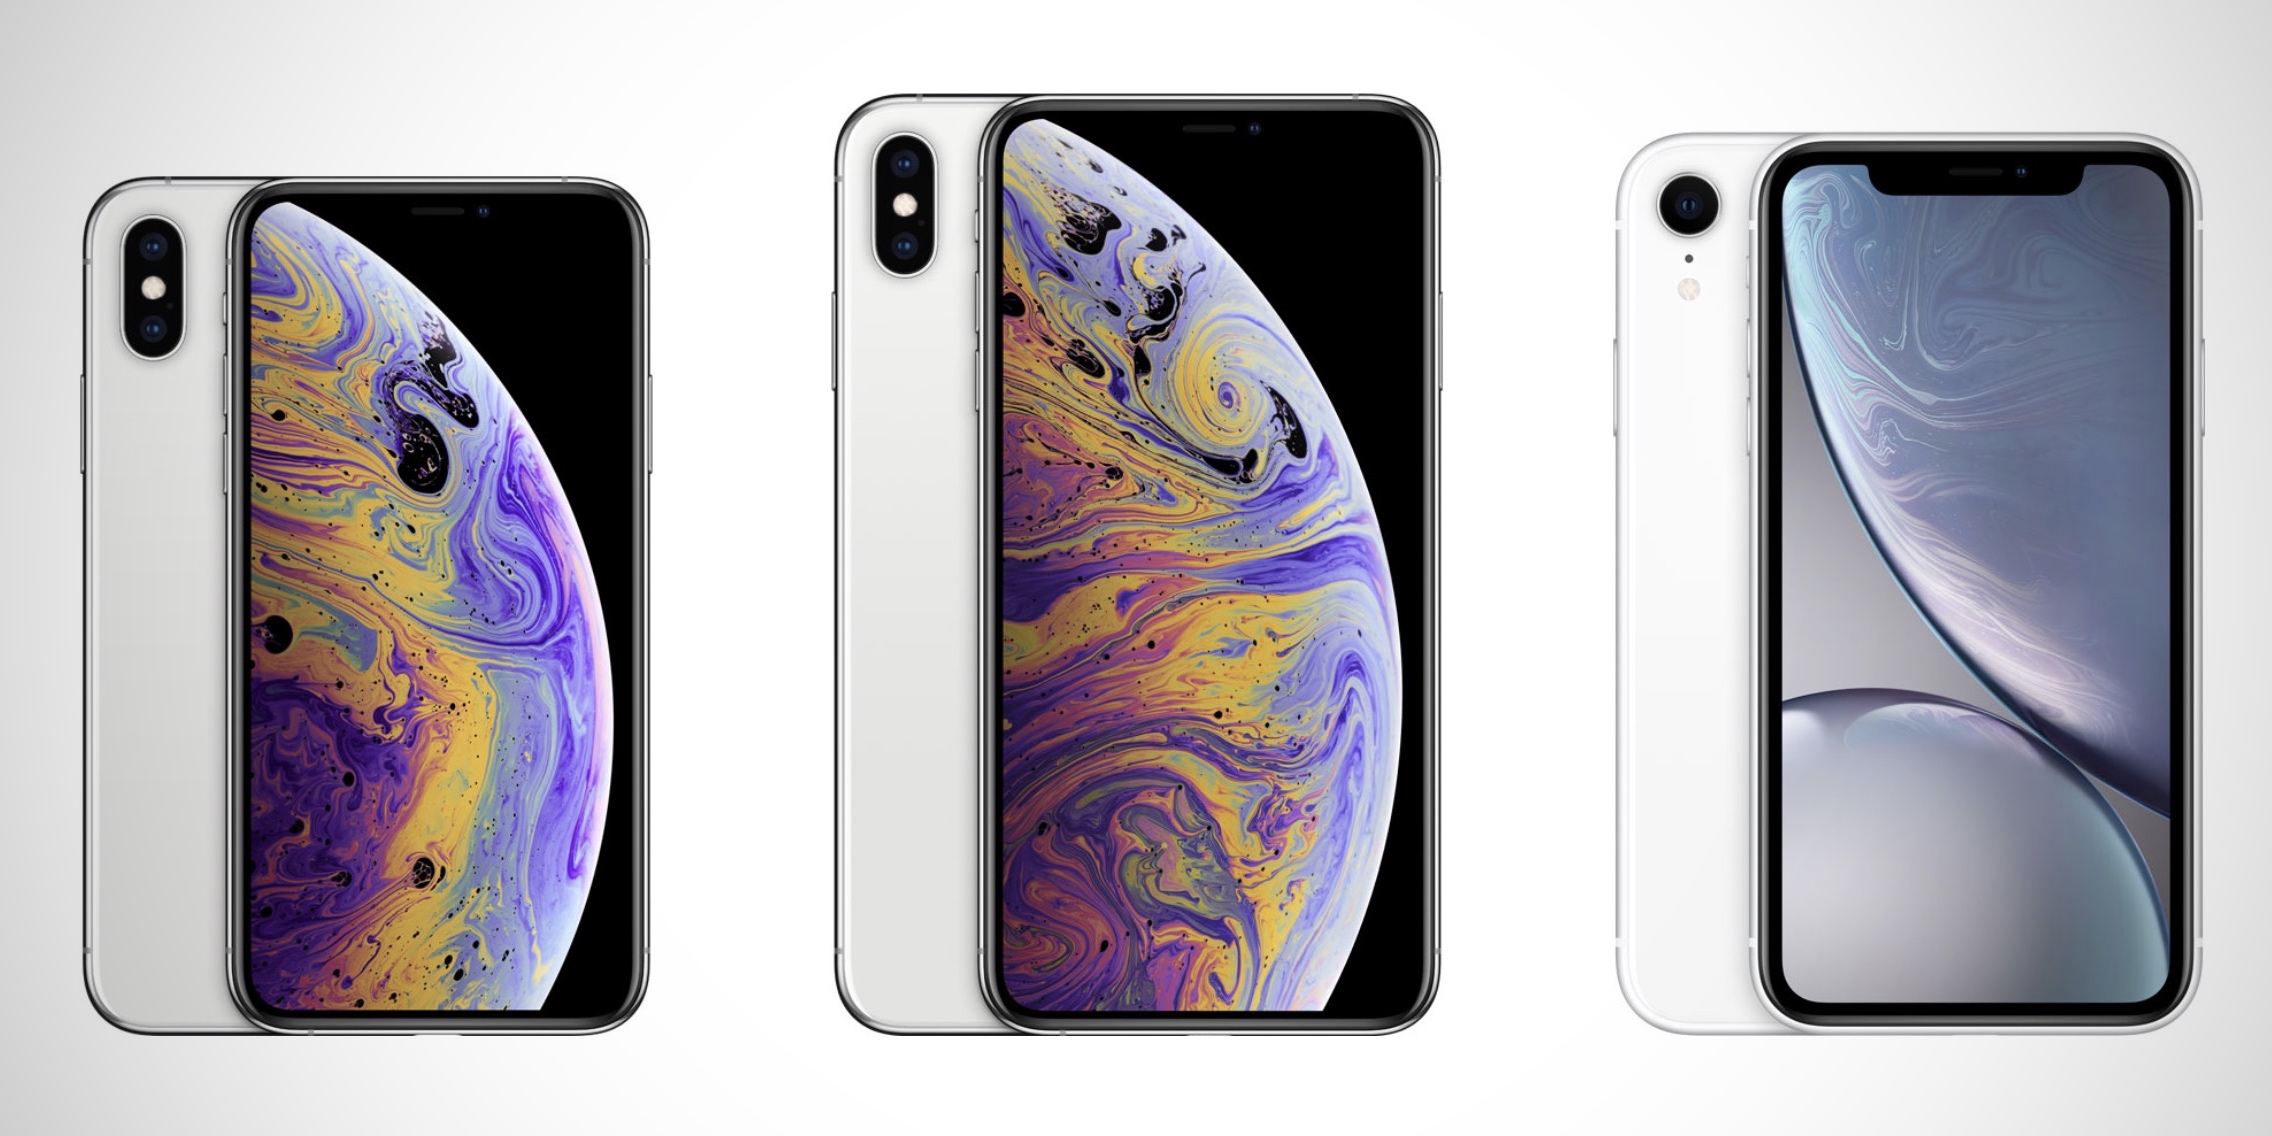 Iphone Xr Vs Iphone Xs Which Should You Buy 9to5mac